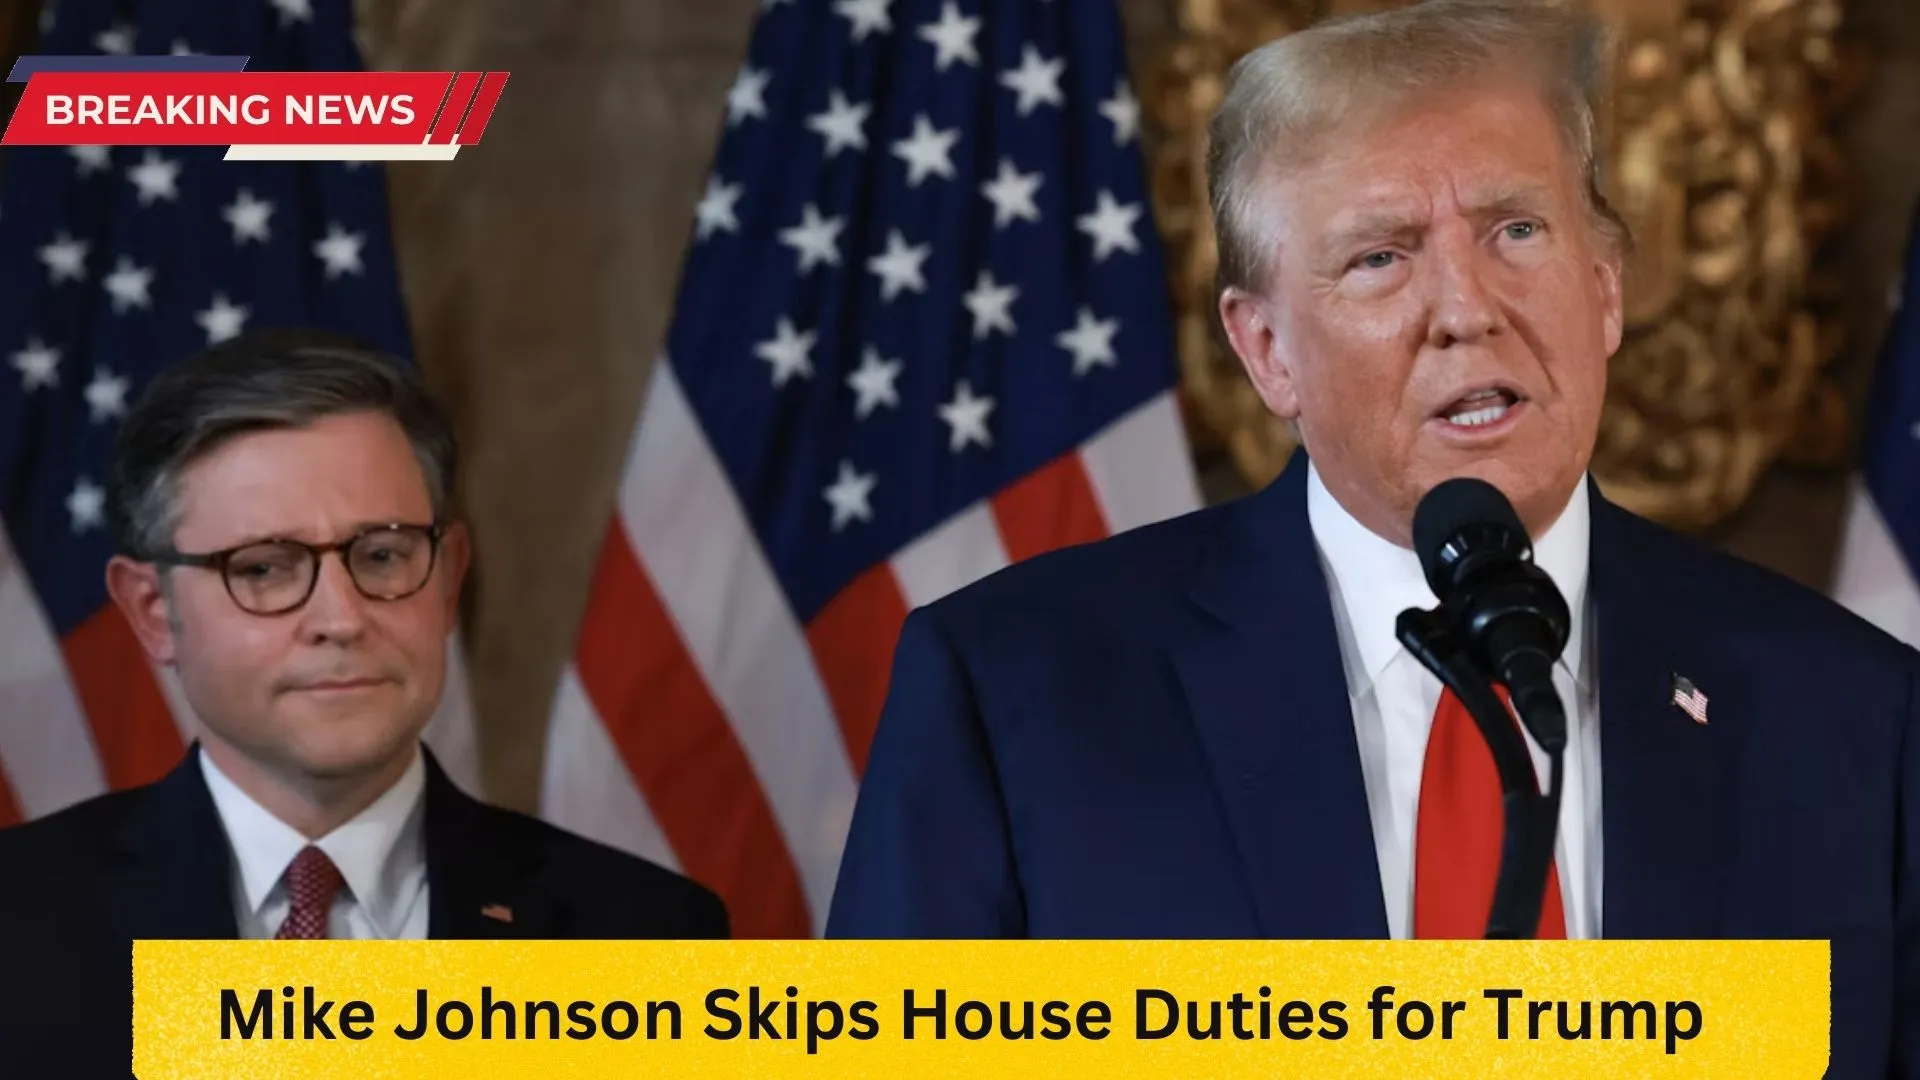 Mike Johnson Skips House Duties for Trump